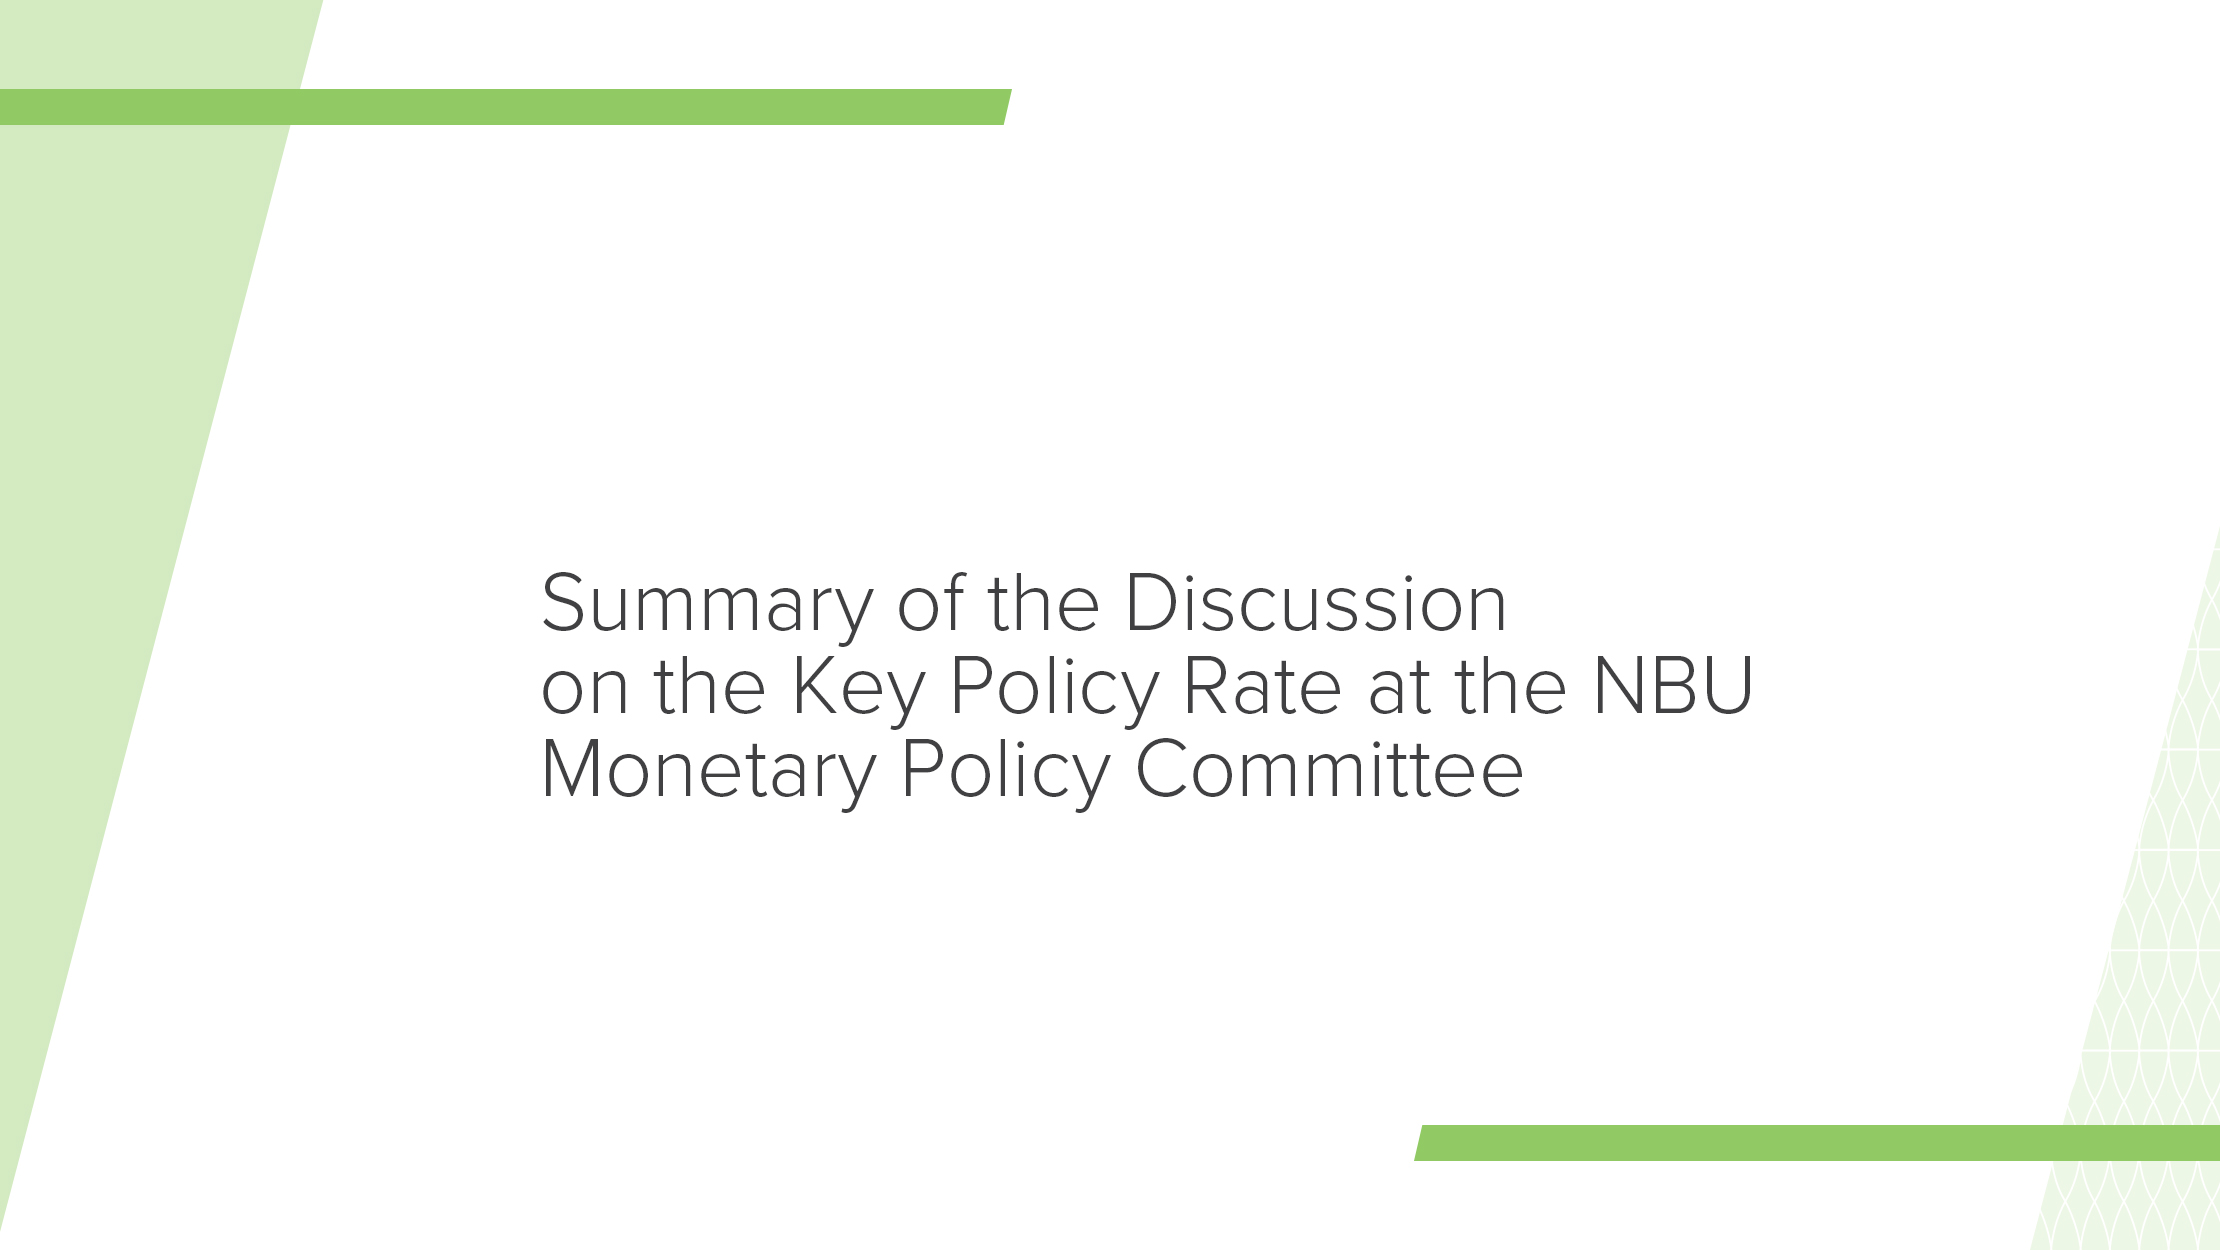 Summary of Key Policy Rate Discussion by NBU Monetary Policy Committee on 13 September 2023